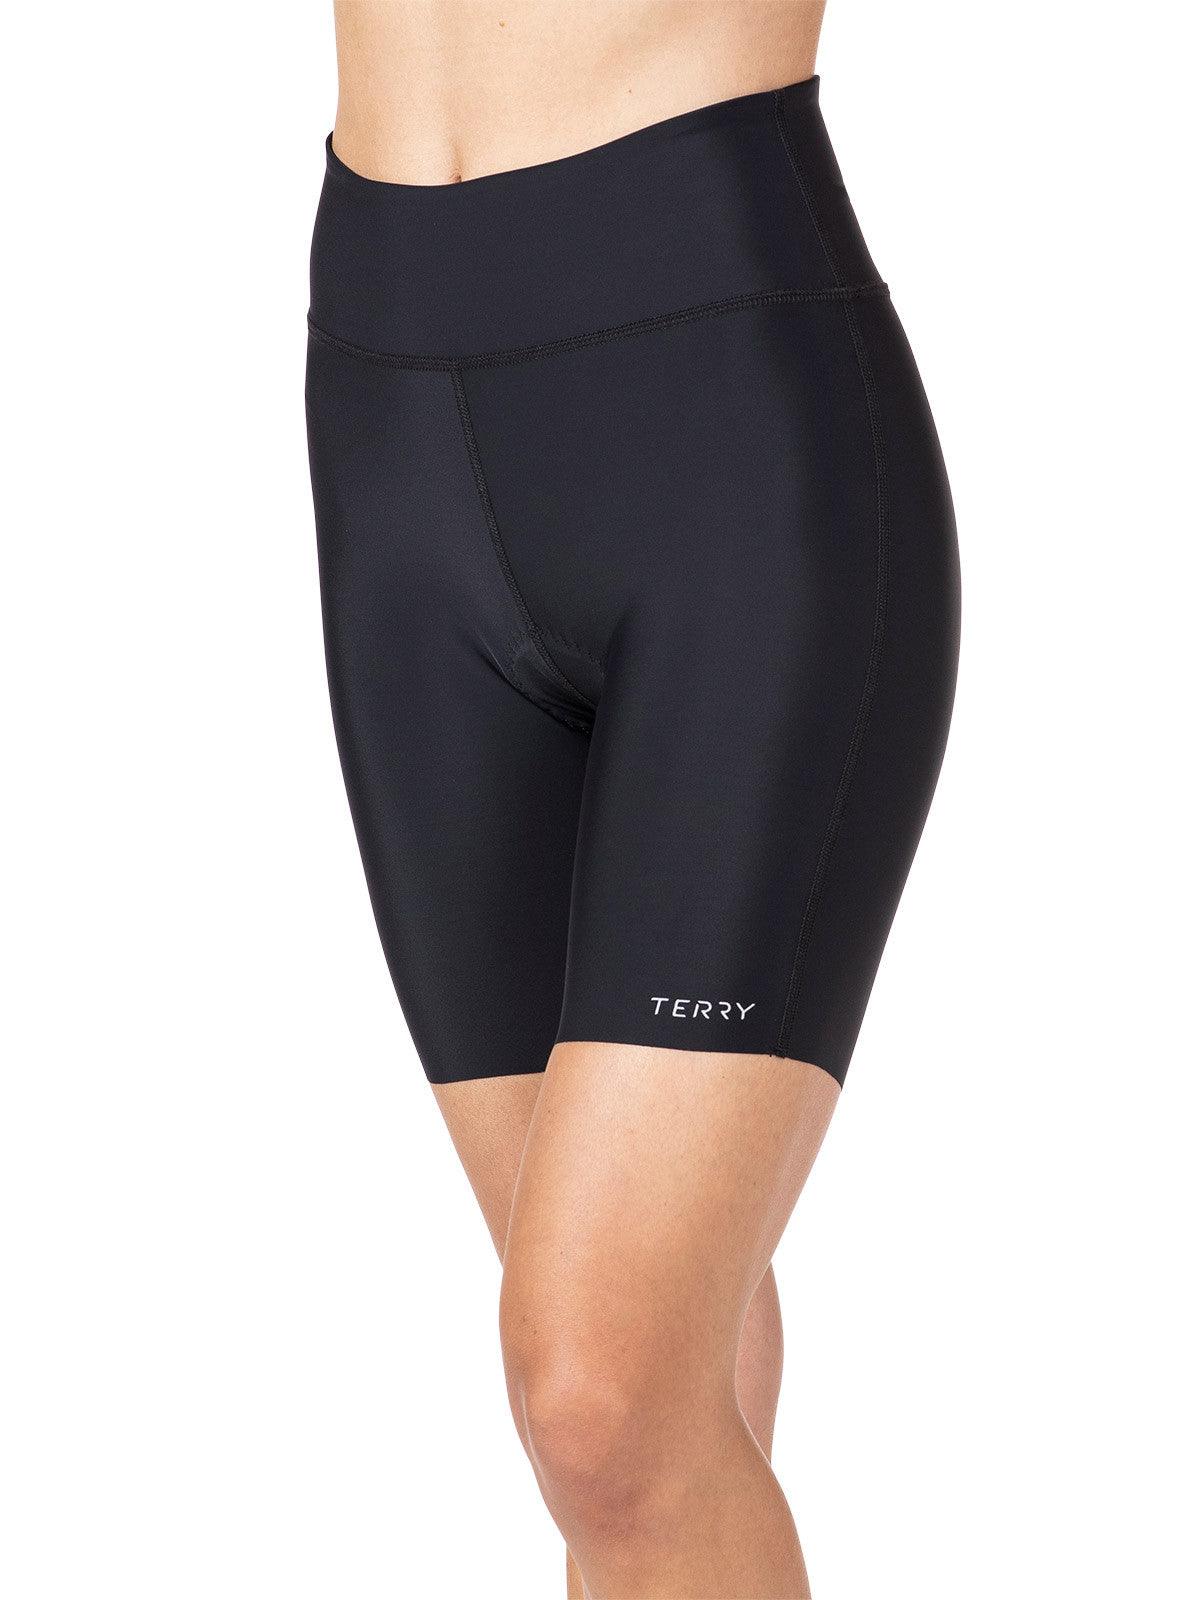 Terry Women's Coolweather Bike Tight